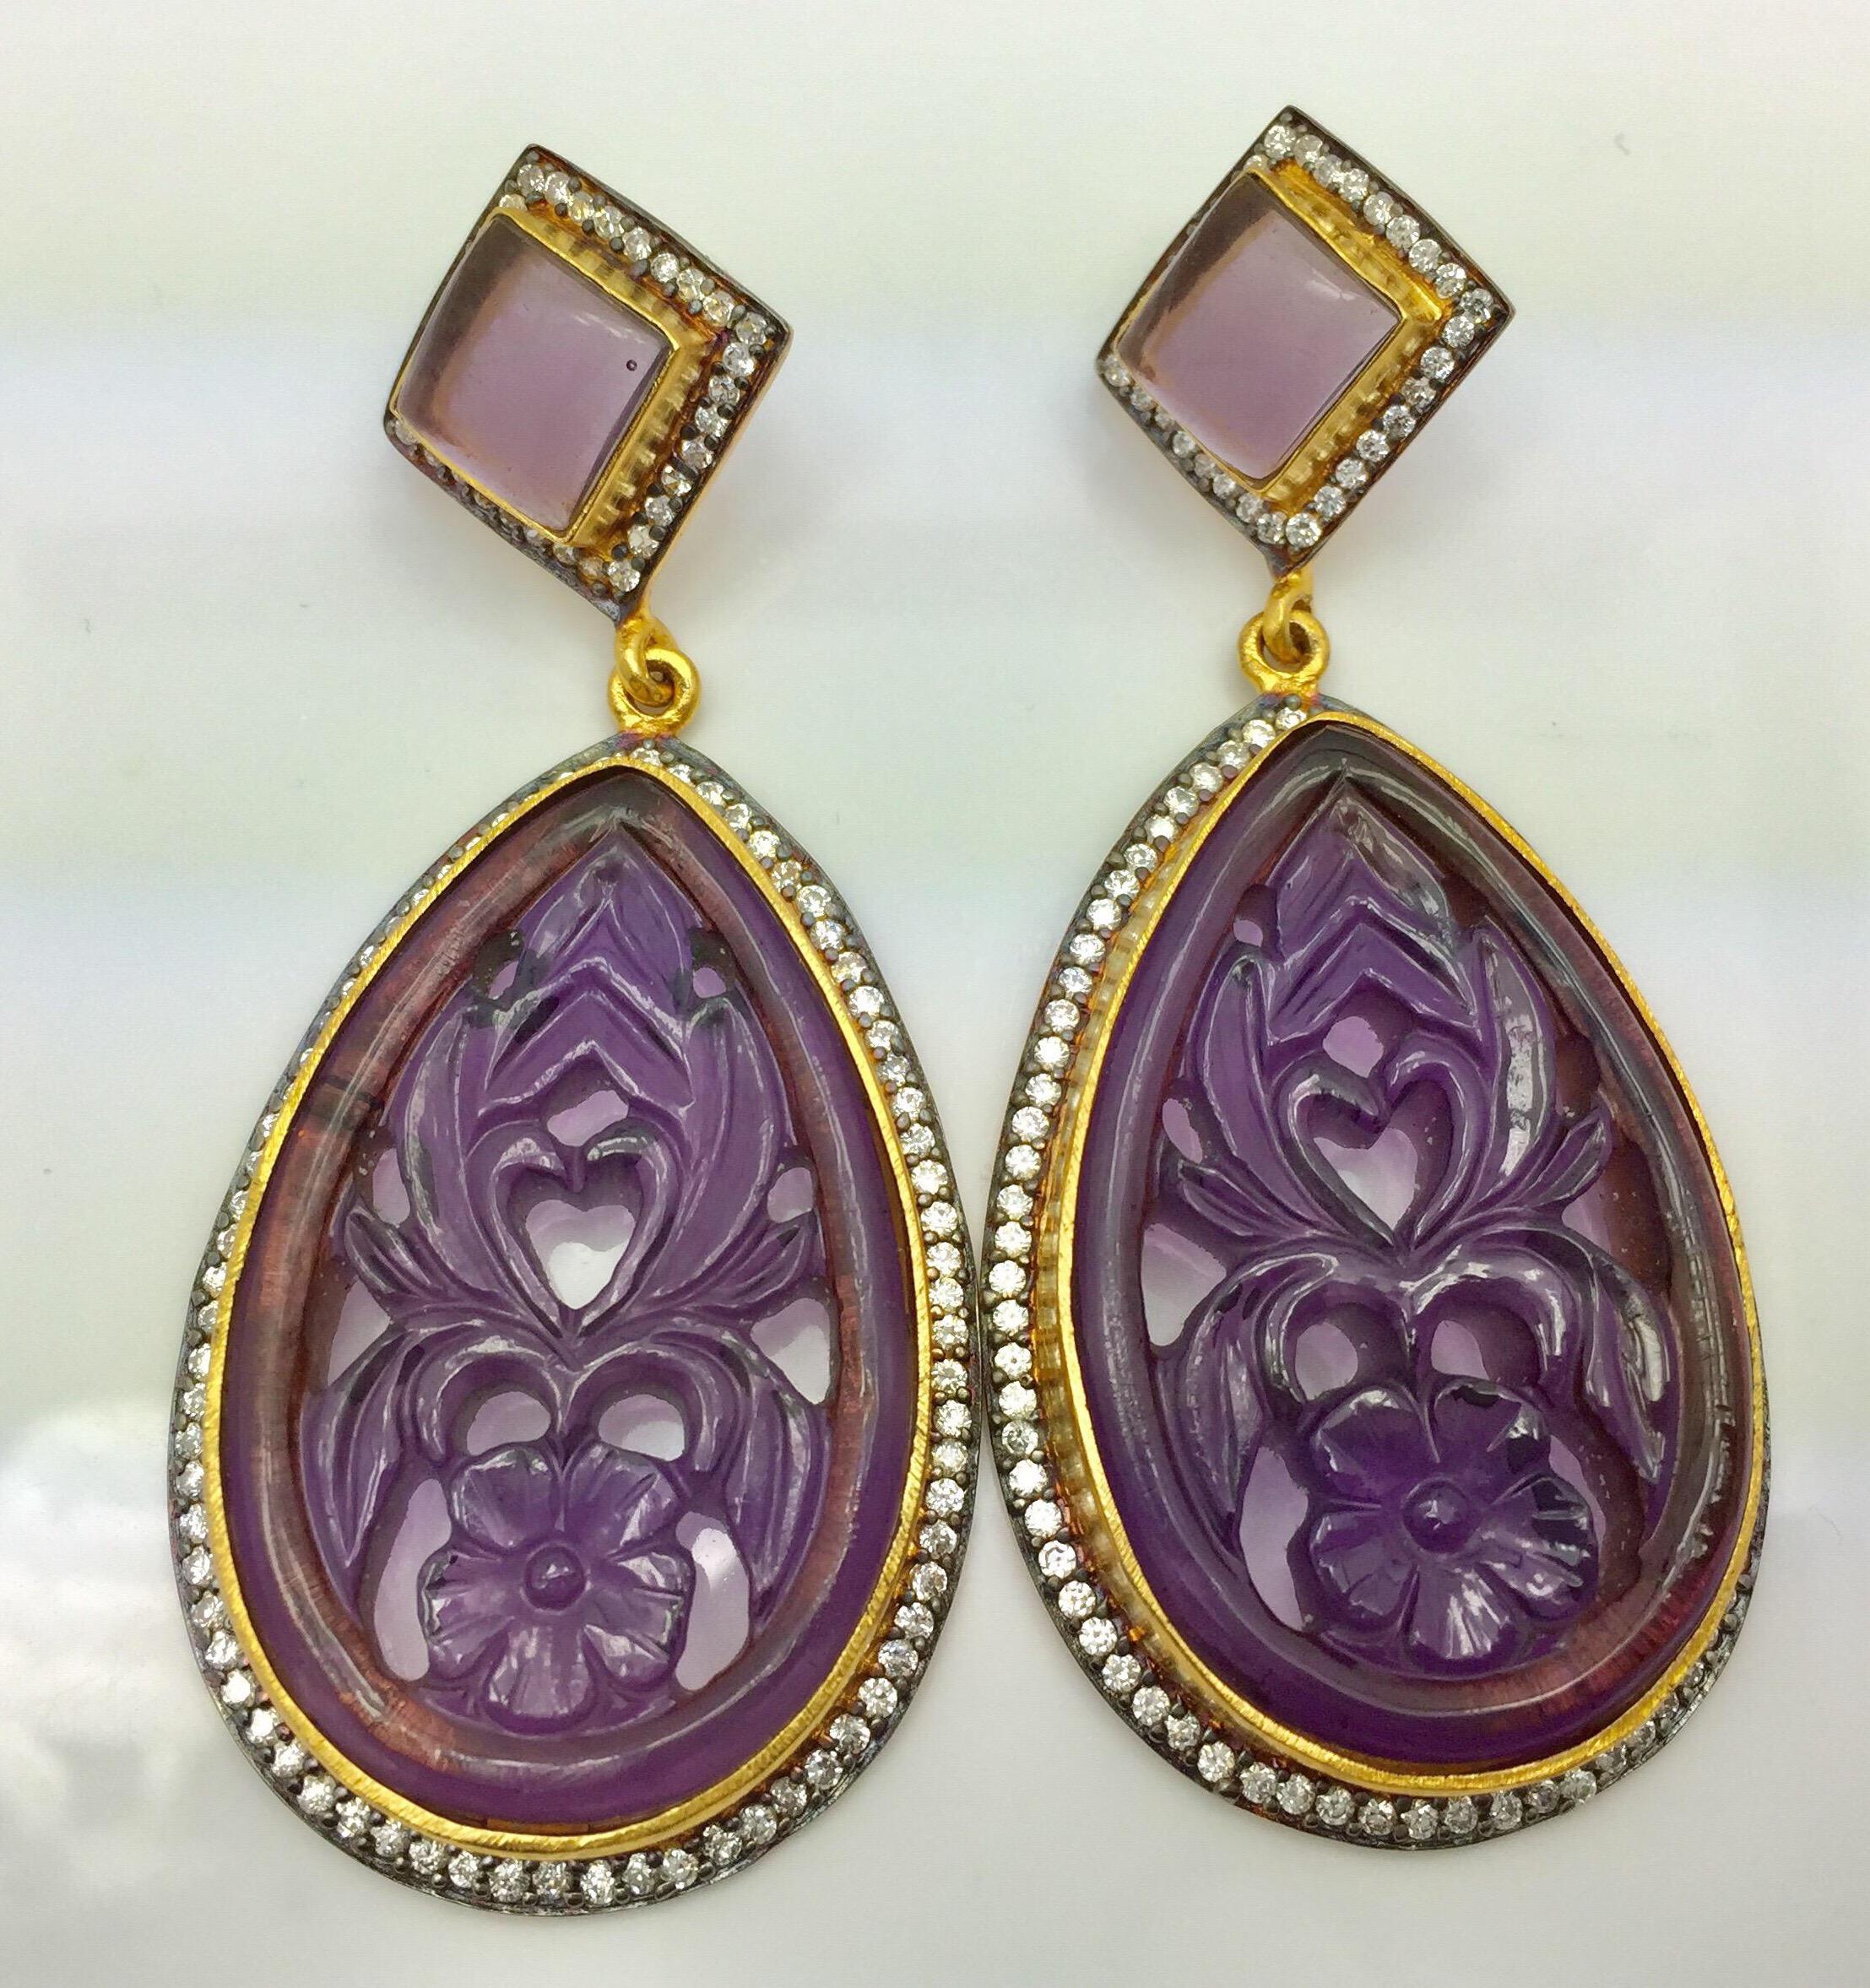 Make your own statement with these handmade faux amethyst carved earrings. Artfully crafted, these gorgeous carved earrings is destined to become your favorite!  Also available in faux rose quartz & emerald green.

FOLLOW  MEGHNA JEWELS storefront